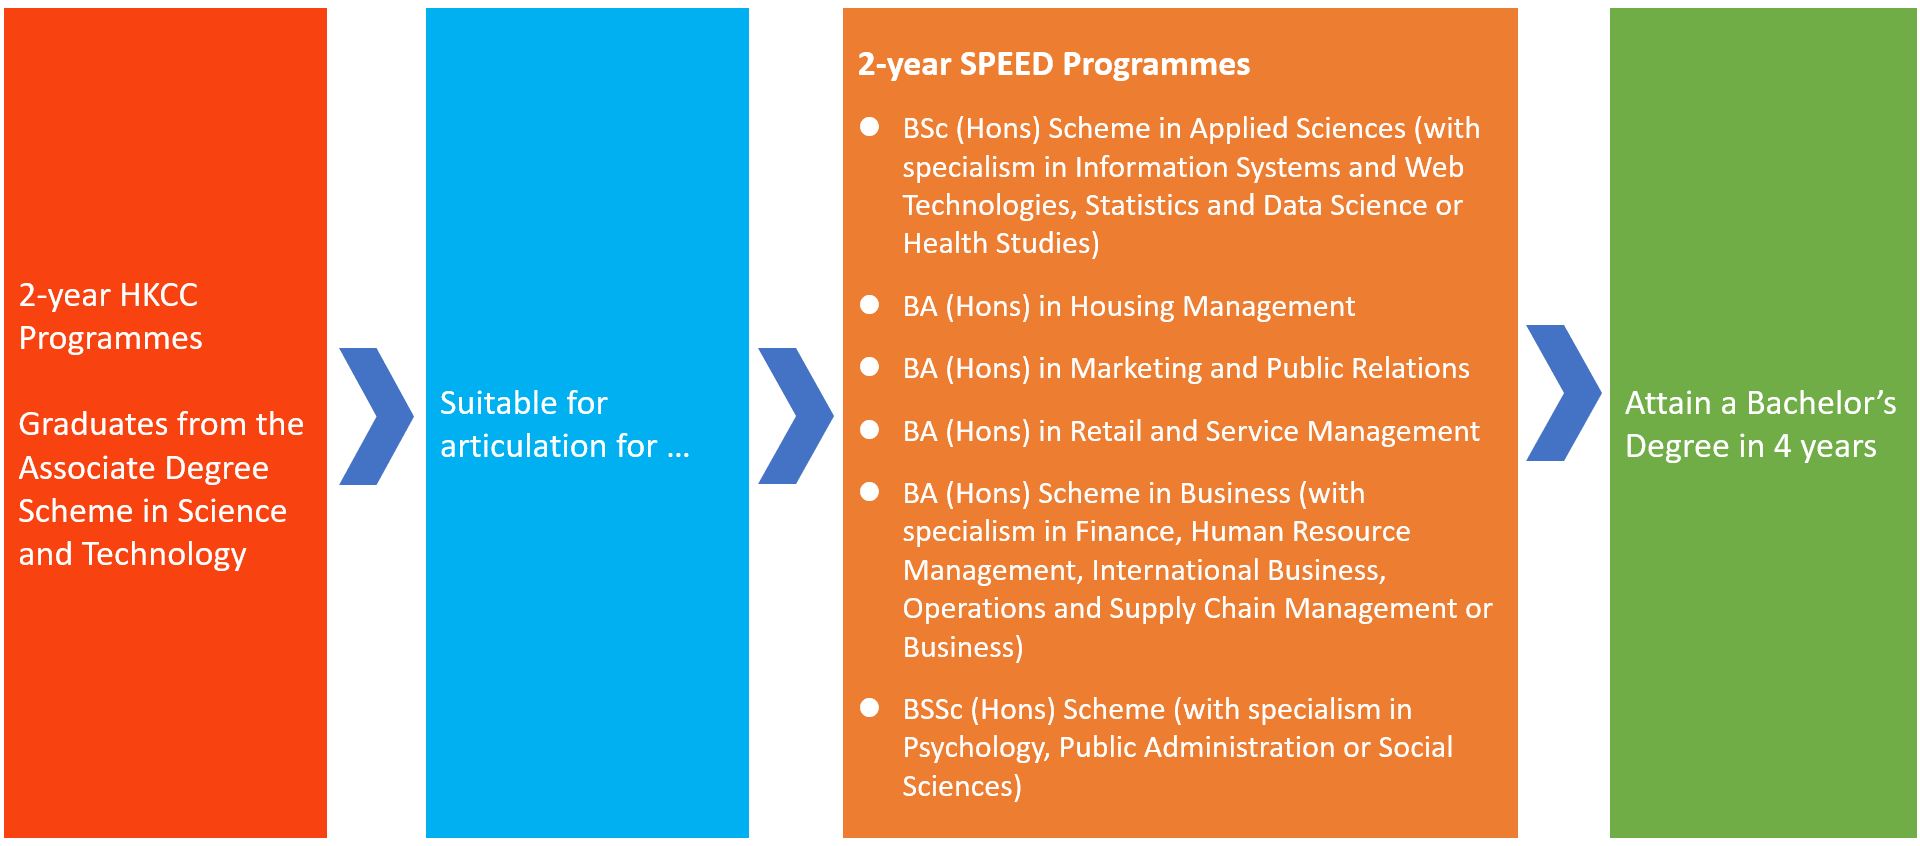 Graduates from the Associate Degree Scheme in Science and Technology are suitable for articulation for a list of 2-year SPEED Programmes – including BSc (Hons) Scheme in Applied Sciences (with specialism in Information Management and Web Development, Decision Science or Health Studies), BA (Hons) in Housing Management, BA (Hons) in Marketing and Public Relations, BA (Hons) in Retail and Service Management, BA (Hons) Scheme in Business (with specialism in Finance, Human Resource Management, International Business, Operations and Supply Chain Management or Business), and BSSc (Hons) Scheme (with specialism in Psychology, Public Administration or Social Sciences).